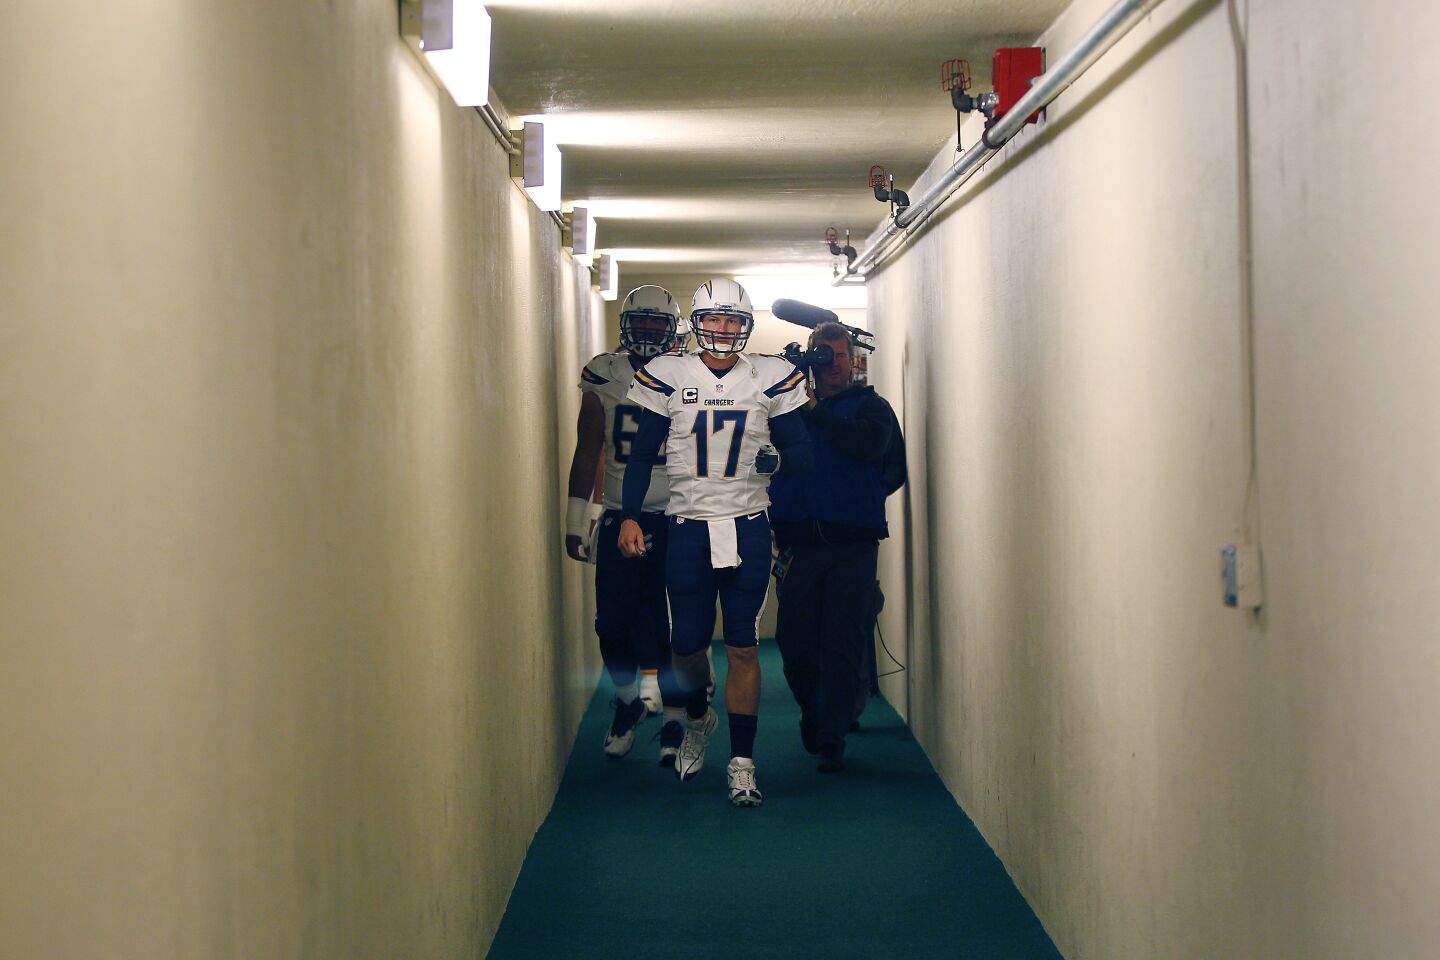 Chargers Philip Rivers walks to the field before a game against the Green Bay Packers on 10/18/15